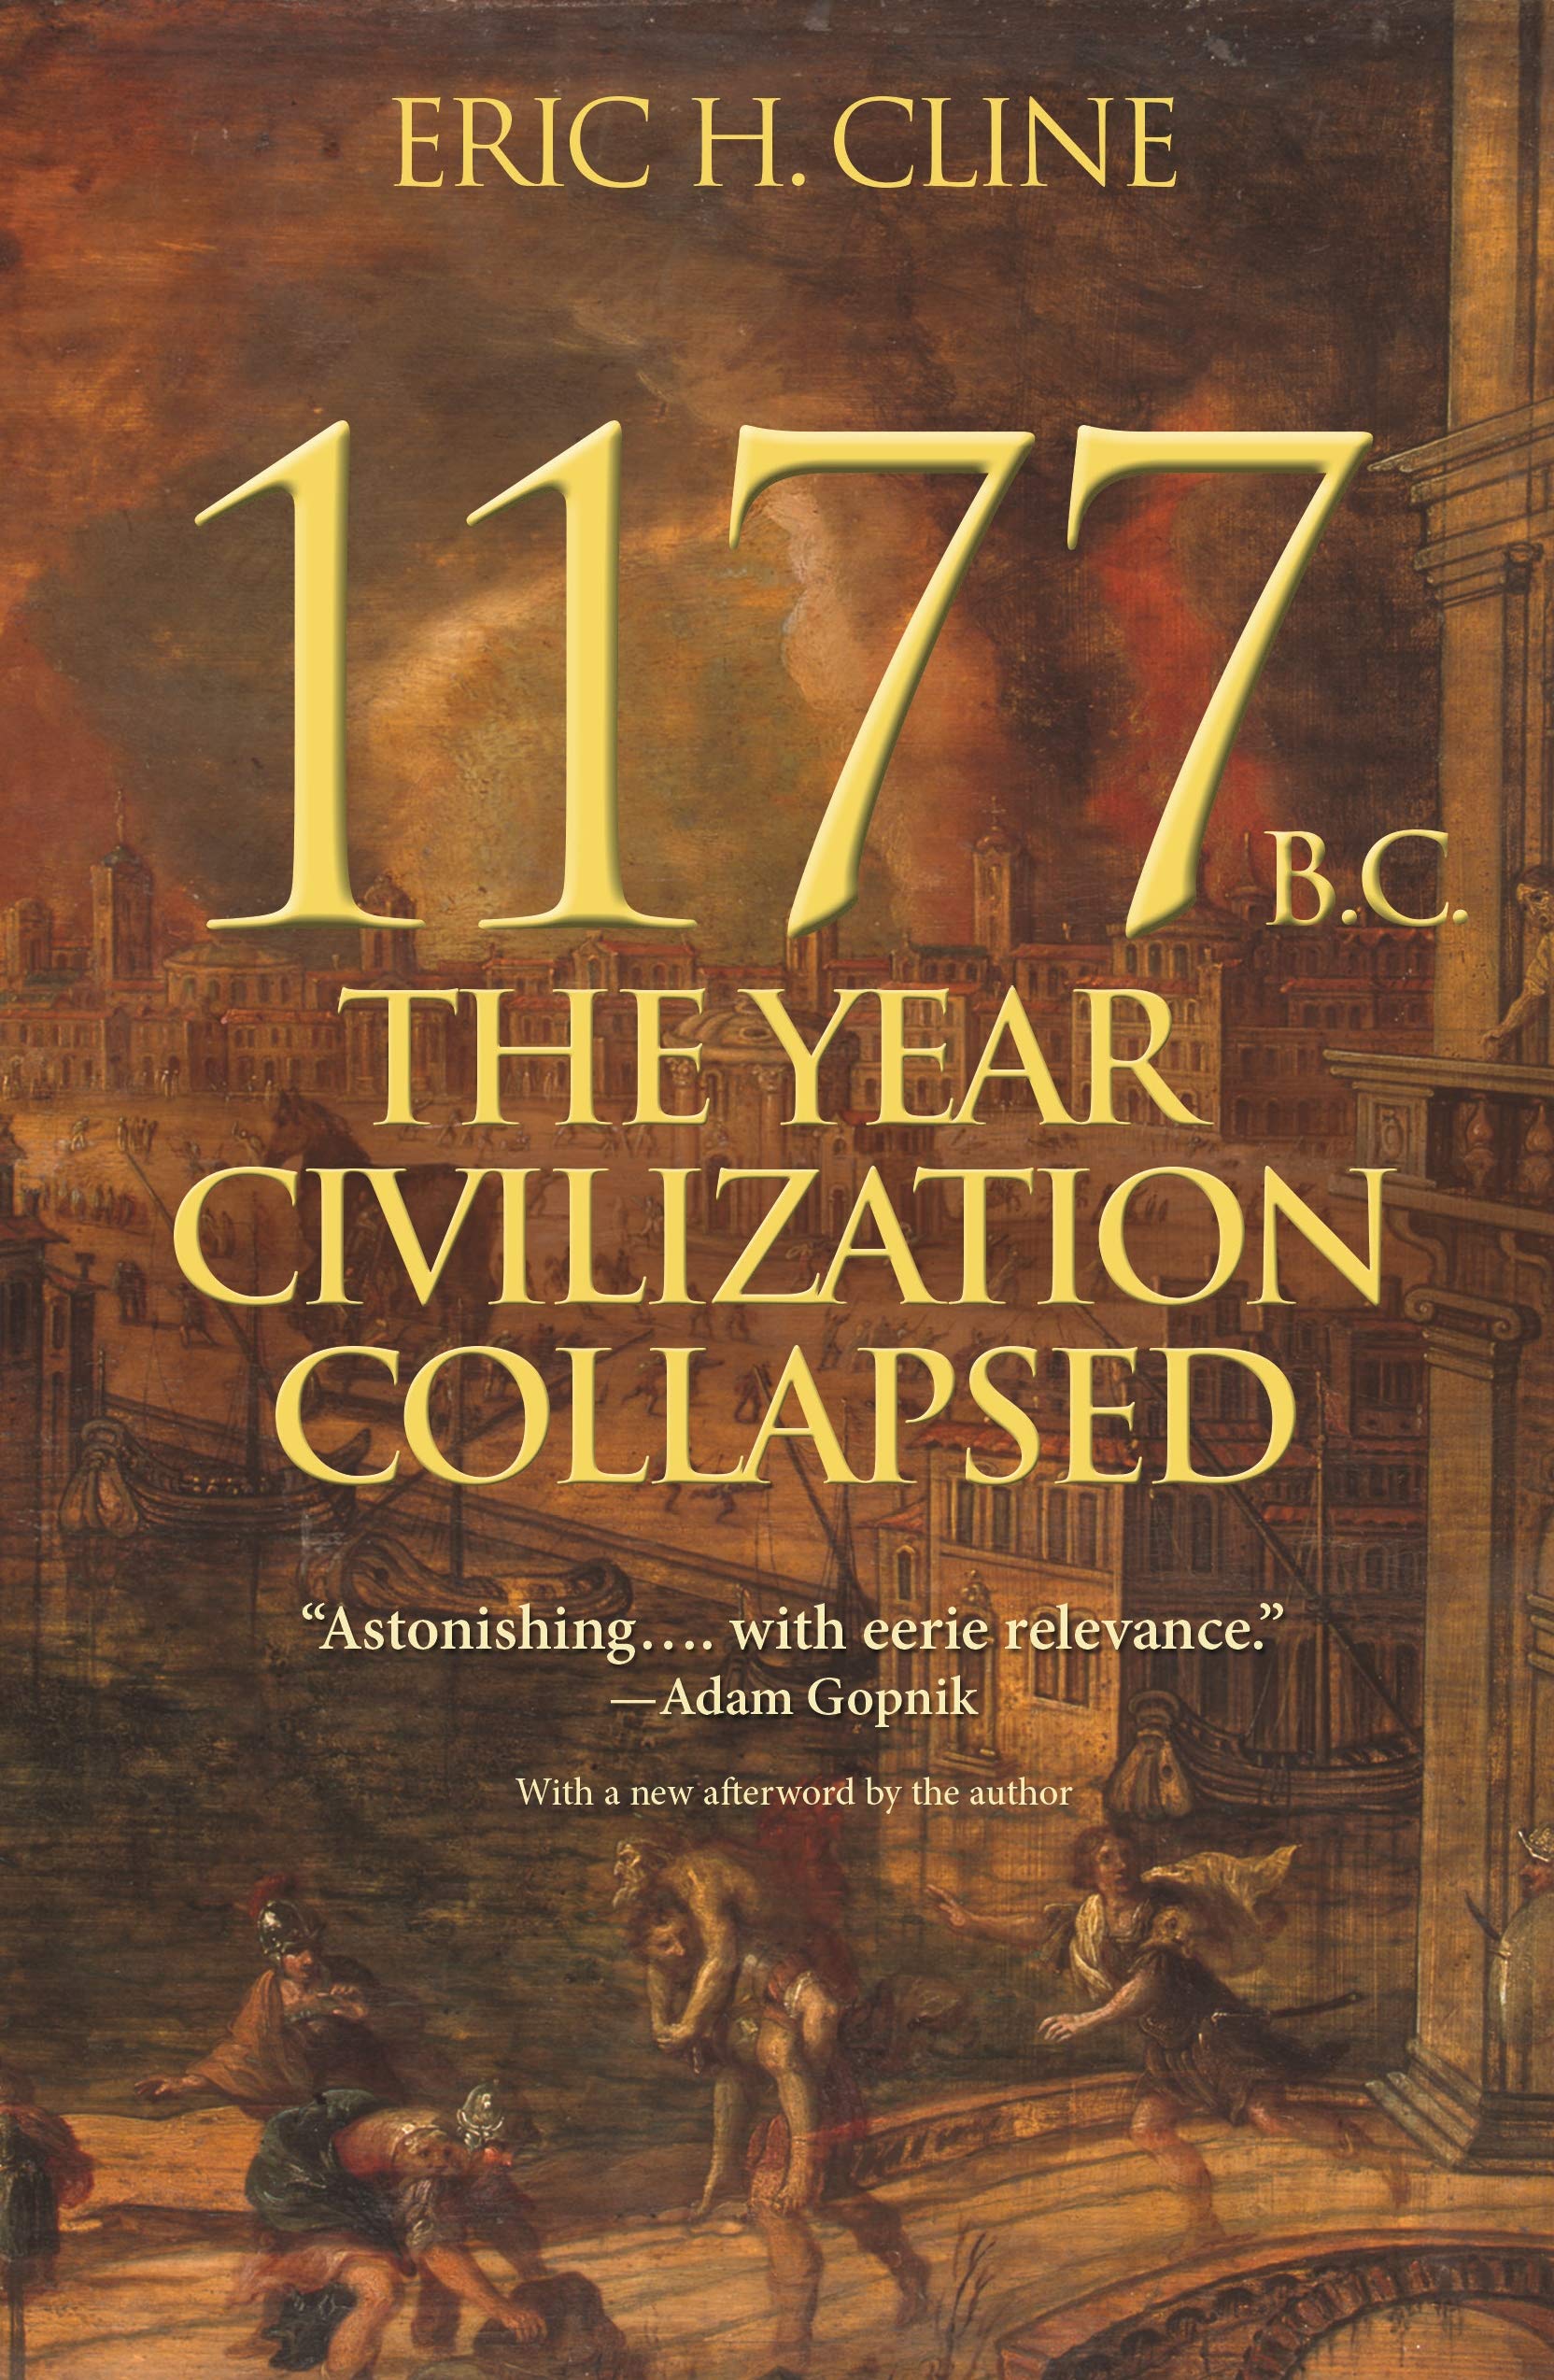 1177 B.C.: The Year Civilization Collapsed: Revised and Updated (Turning Points in Ancient History Book 6)